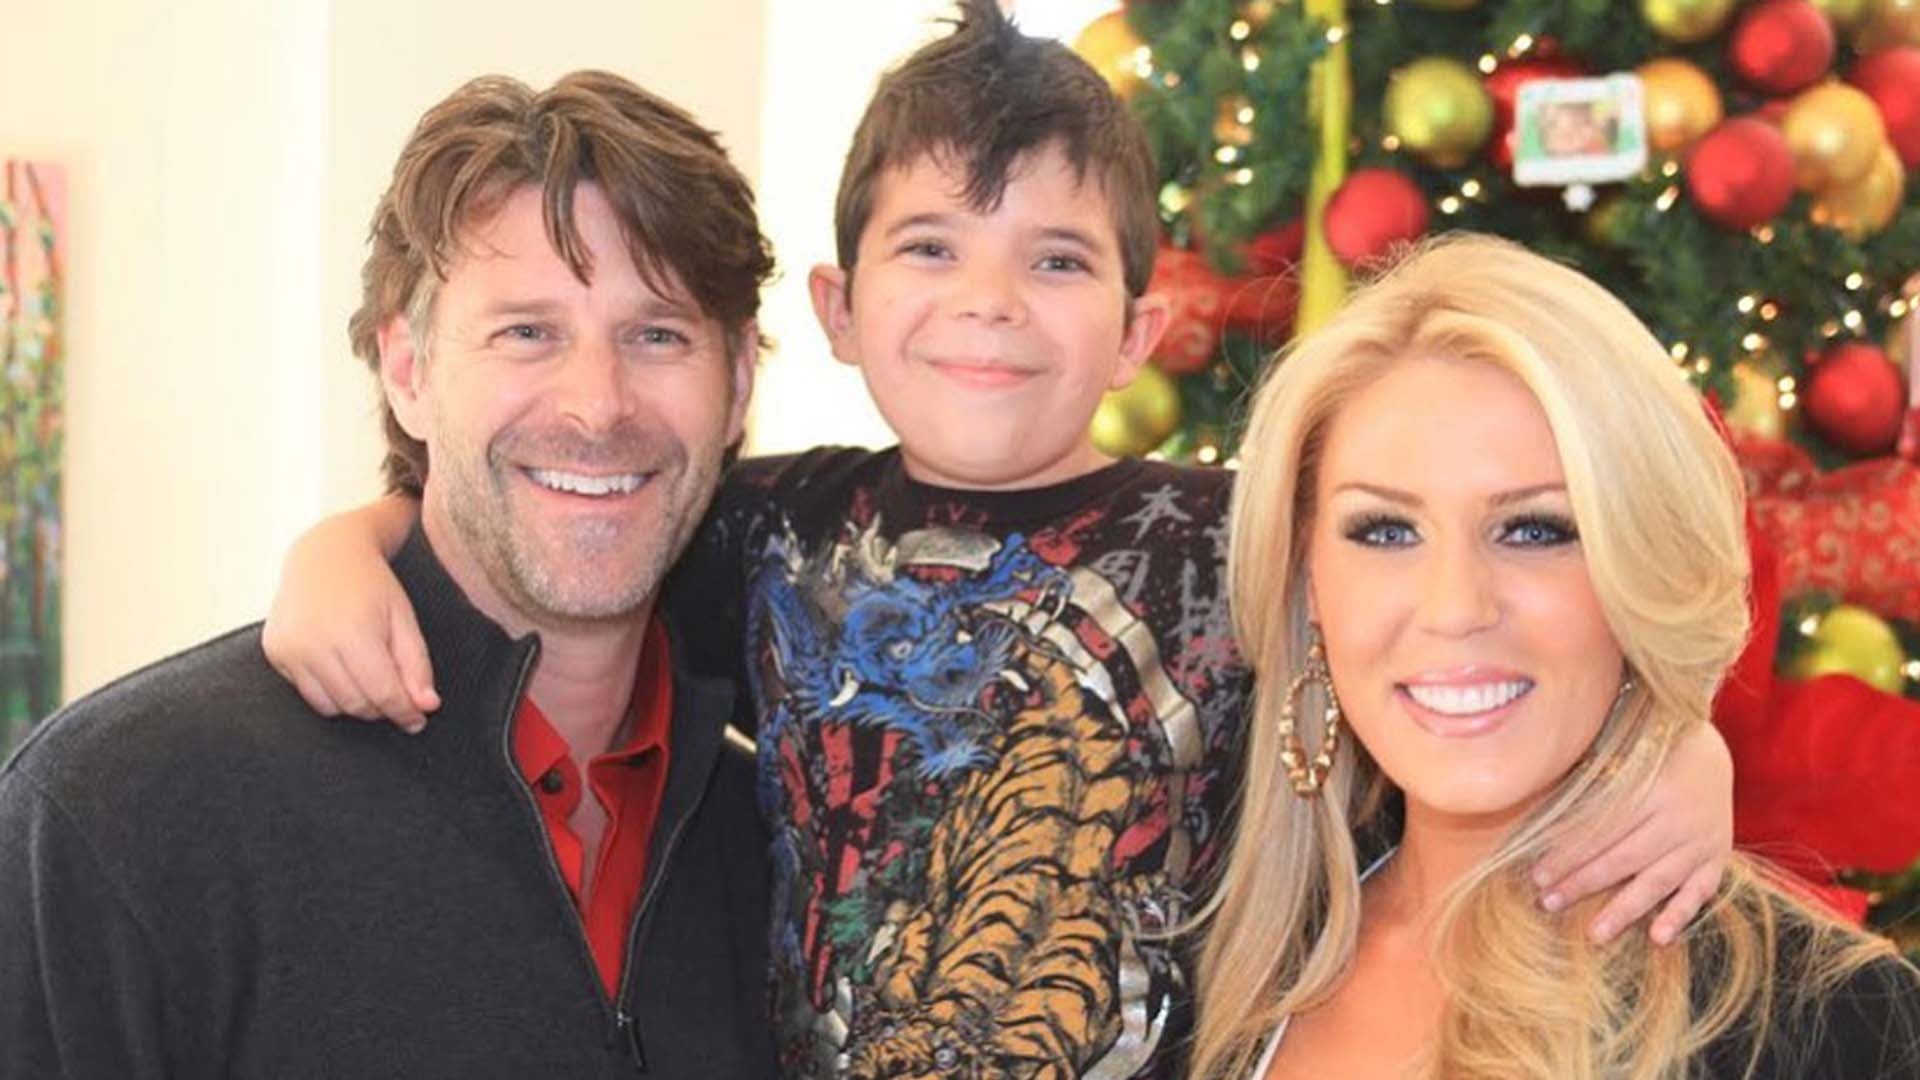 'RHOC' Alum Gretchen Rossi Shares Slade Smiley’s Son Died at 22 Following Cancer Battle